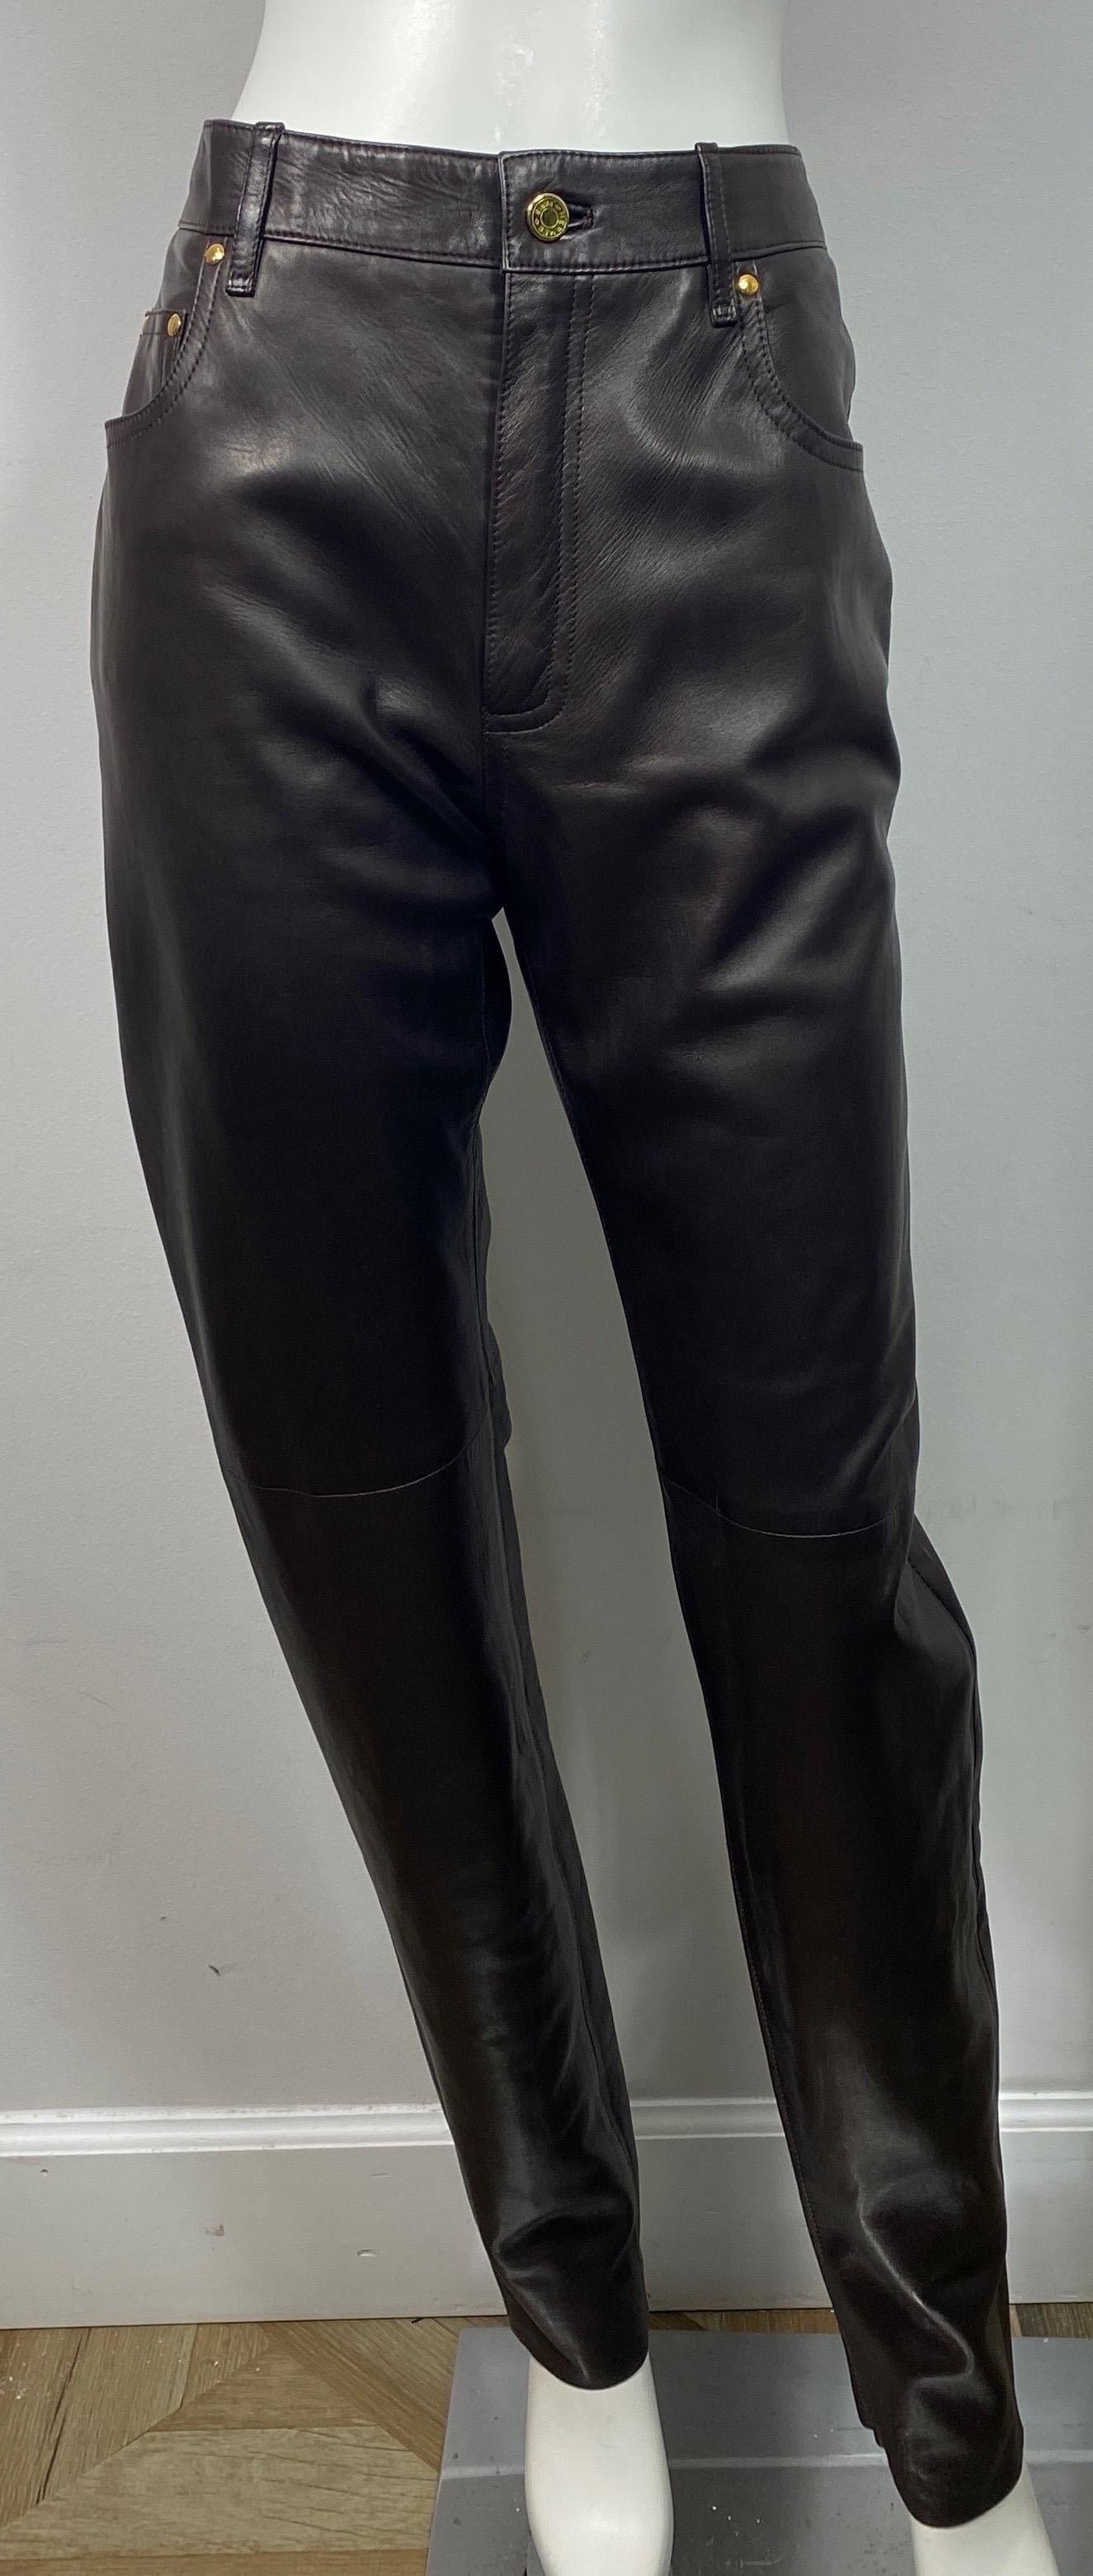 Hermes 1990’s Vintage Chocolate Brown Jean Style Leather Pants - Size 42 In Excellent Condition For Sale In West Palm Beach, FL